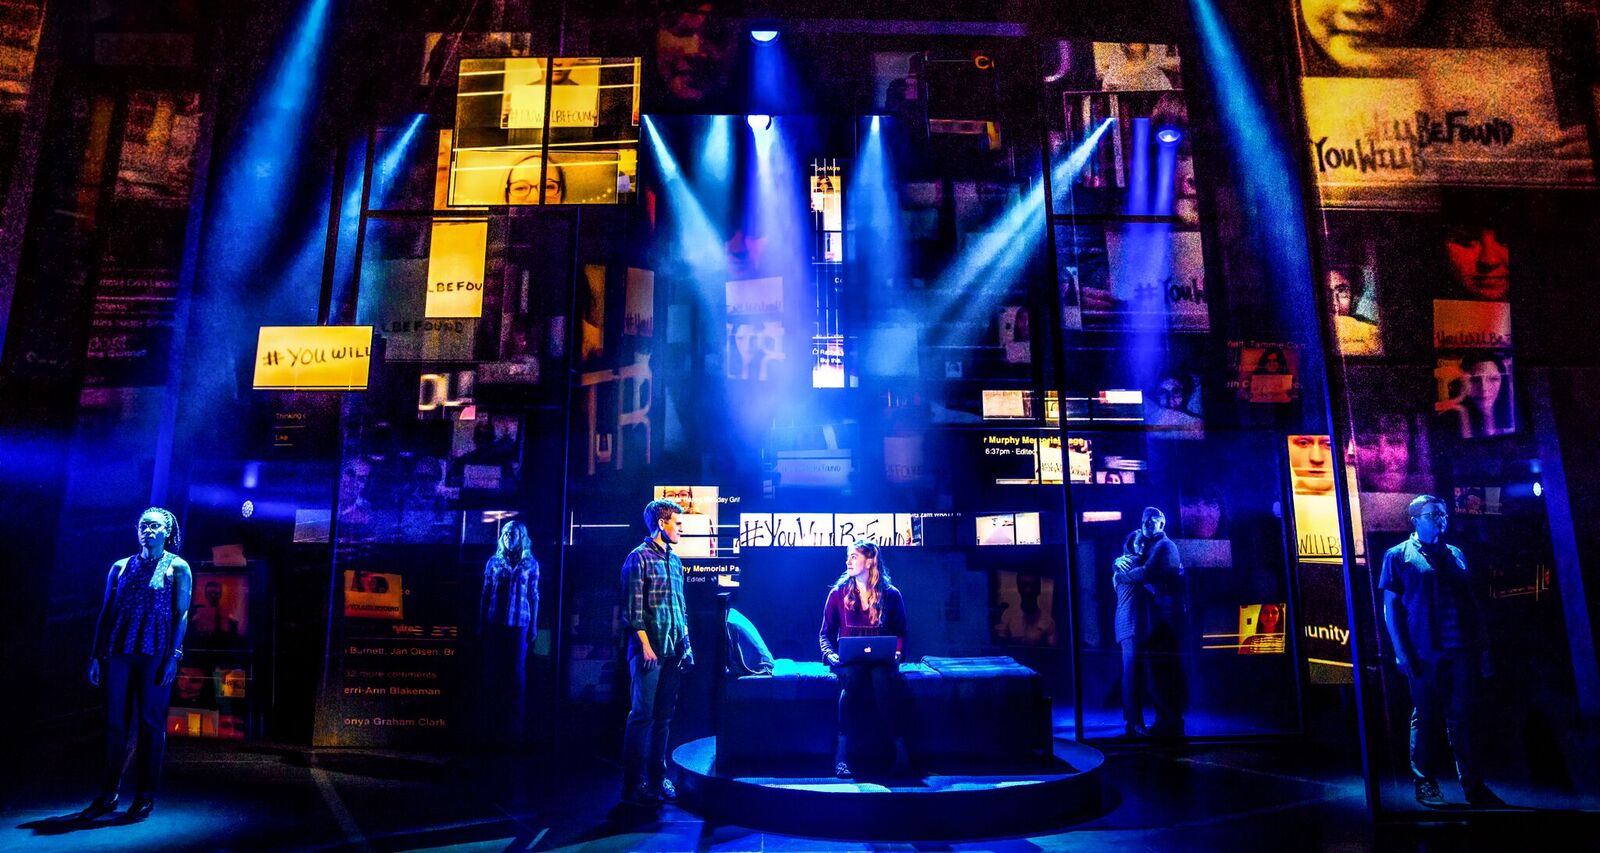 Broadway In Chicago Announces "DEAR EVAN HANSEN" TIX ON SALE SEPT. 9 1  Broadway In Chicago and Producer Stacey Mindich are pleased to announce that tickets will go on-sale to the general public for the first national touring production of the 2017 Best Musical Tony Award-winner Dear Evan Hansen on Sunday, September 9 at 10:00AM.  Fans who “like” the Dear Evan Hansen Facebook page will receive early access to a limited number of tickets from  9:00 – 10:00 AM on Sunday, September 9, online only, via a special access code.  Dear Evan Hansen will play Broadway In Chicago’s Oriental Theatre (24 W. Randolph) for a limited four-week engagement February 12 – March 10, 2019.